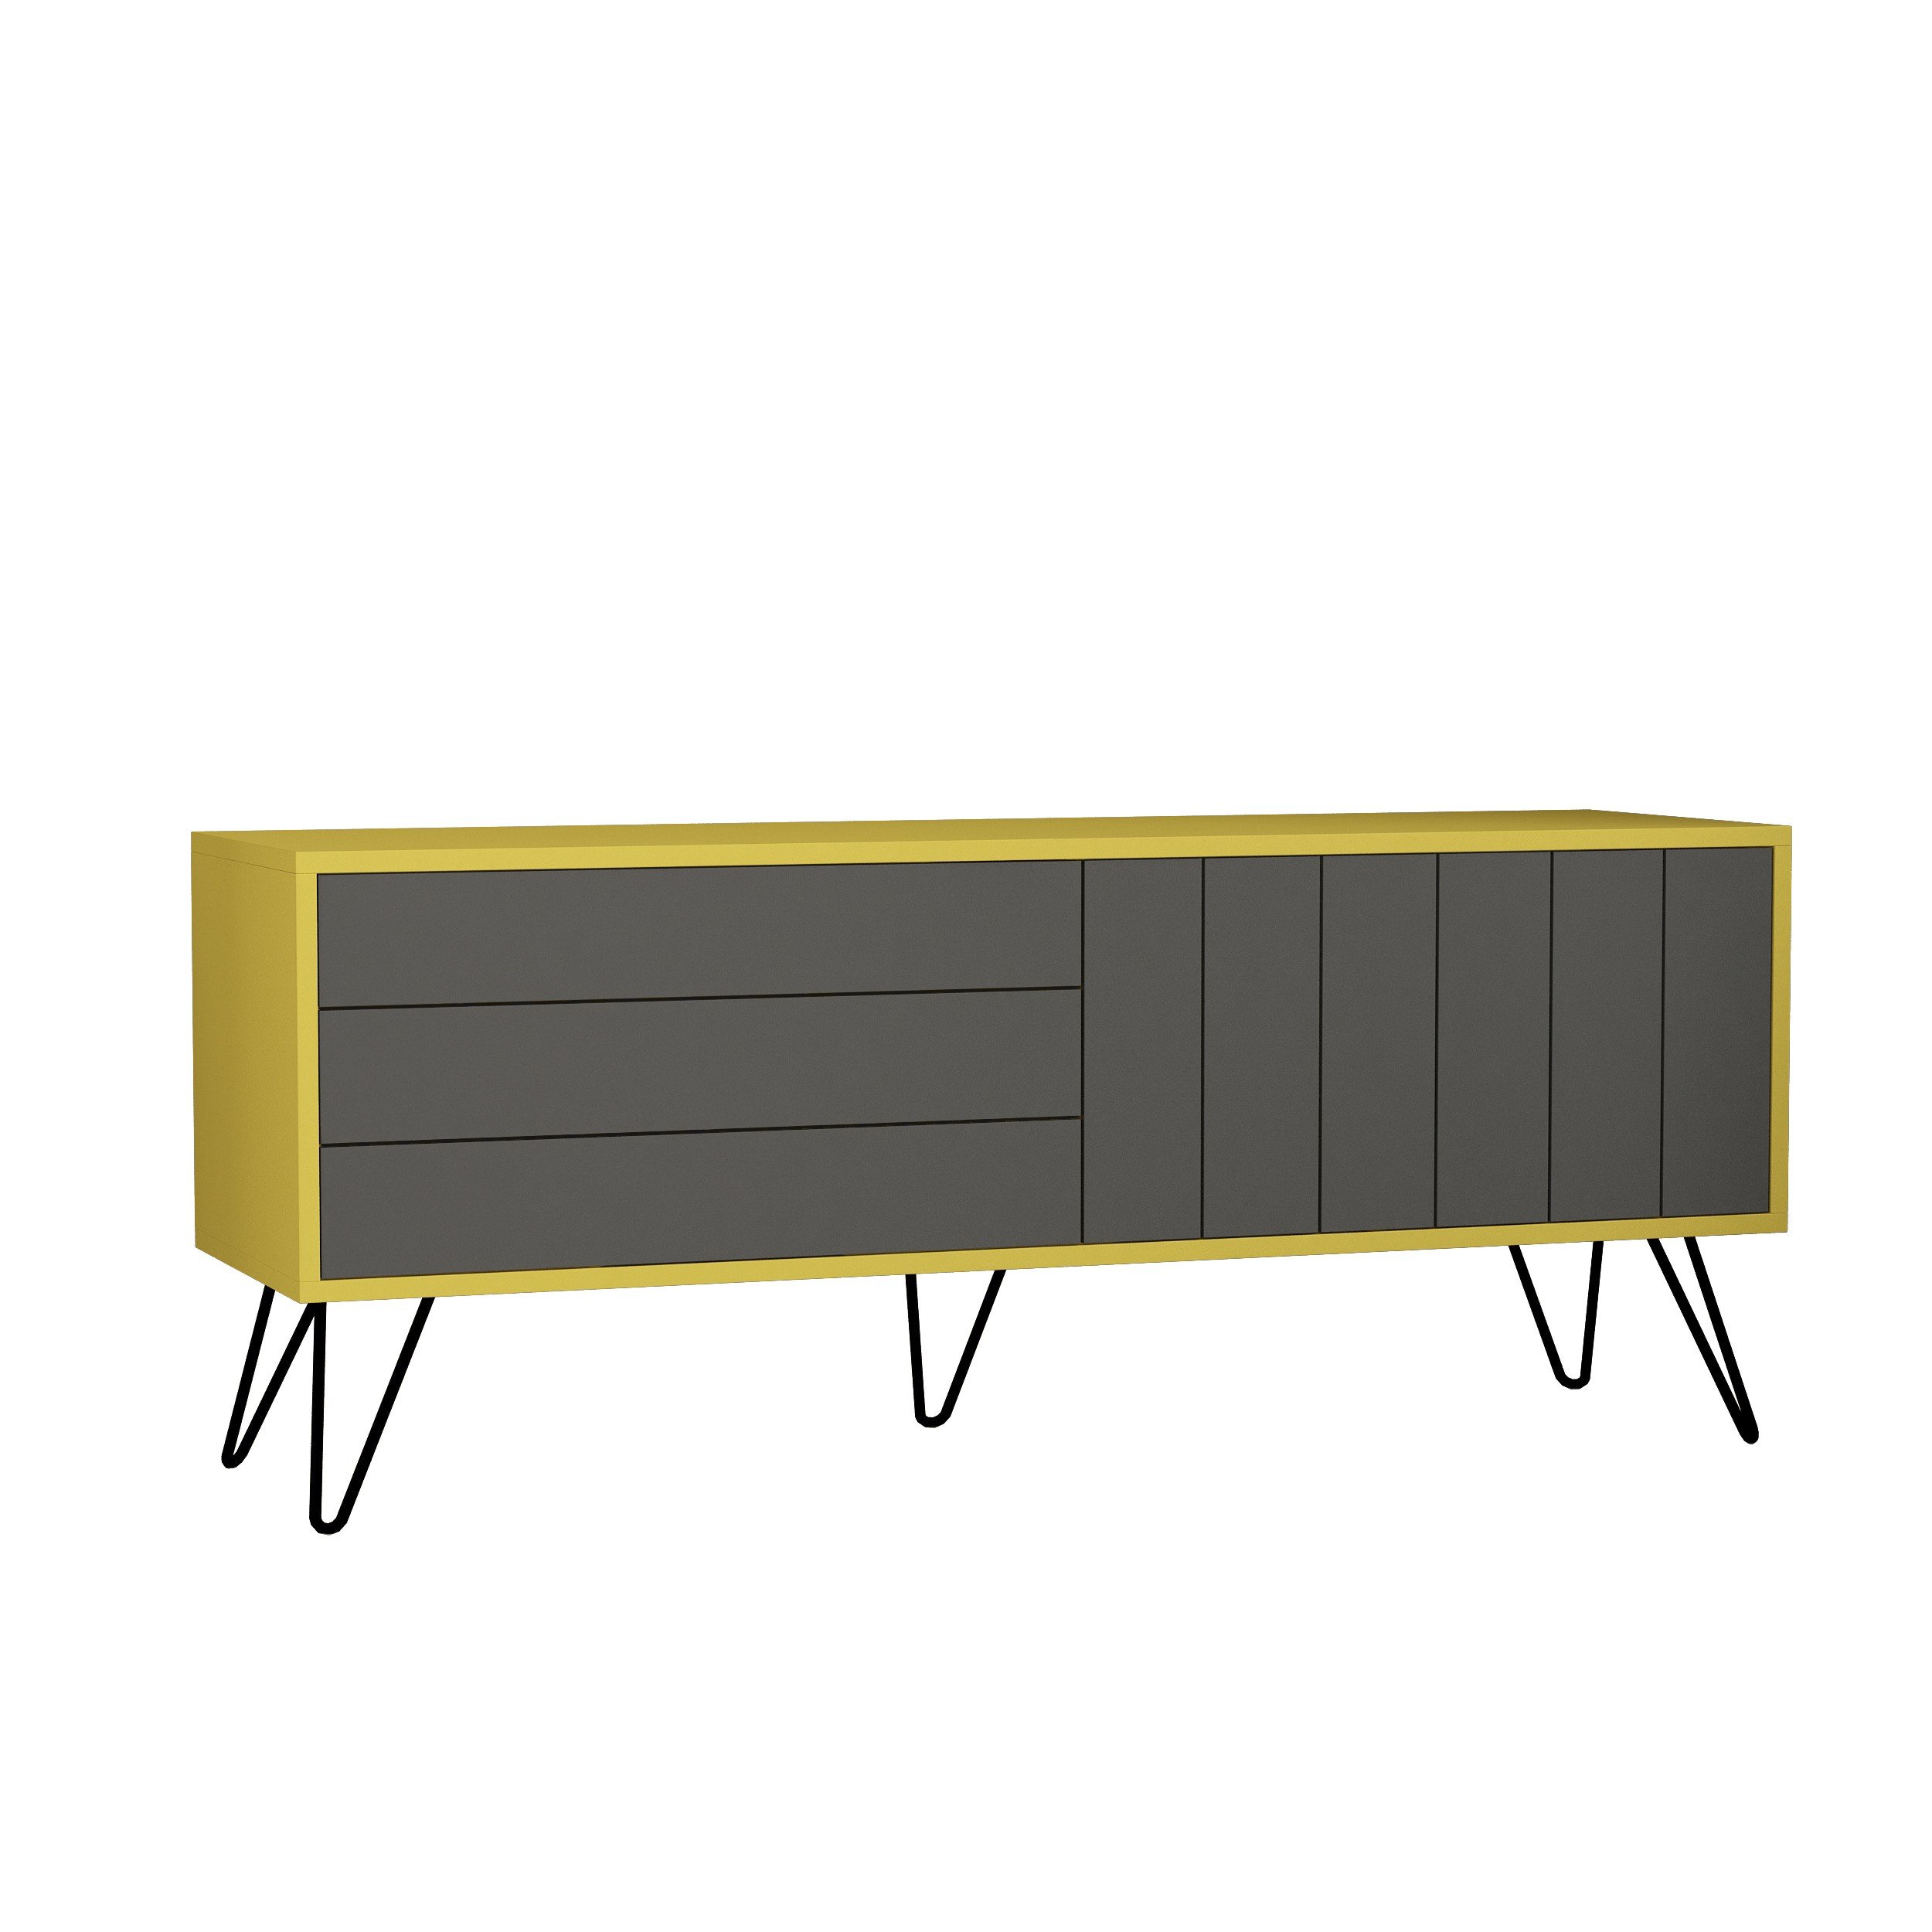 PICADILLY TV STAND - MUSTARD - ANTHRACITE - M.TV.18653.4